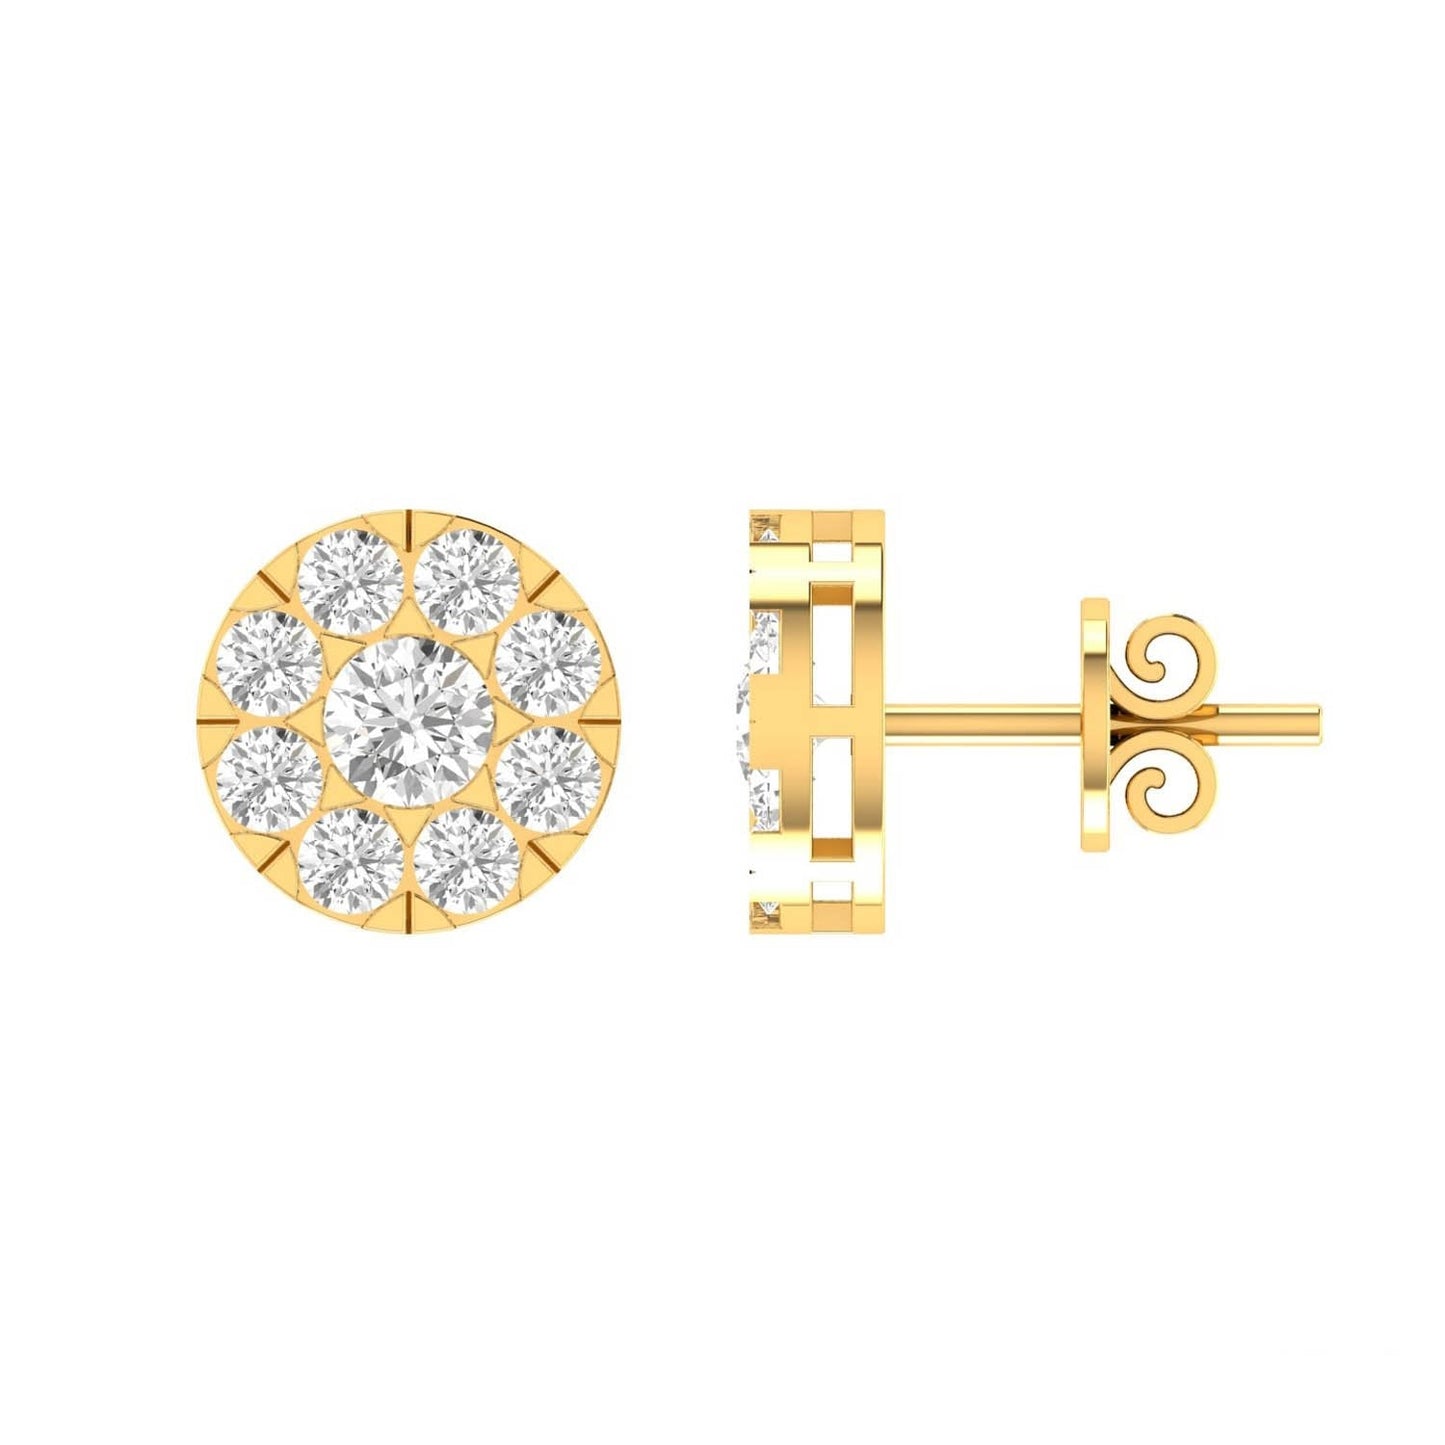 Cluster Diamond Stud Earrings with 0.25ct Diamonds in 9K Yellow Gold - 9YECLUS25GH